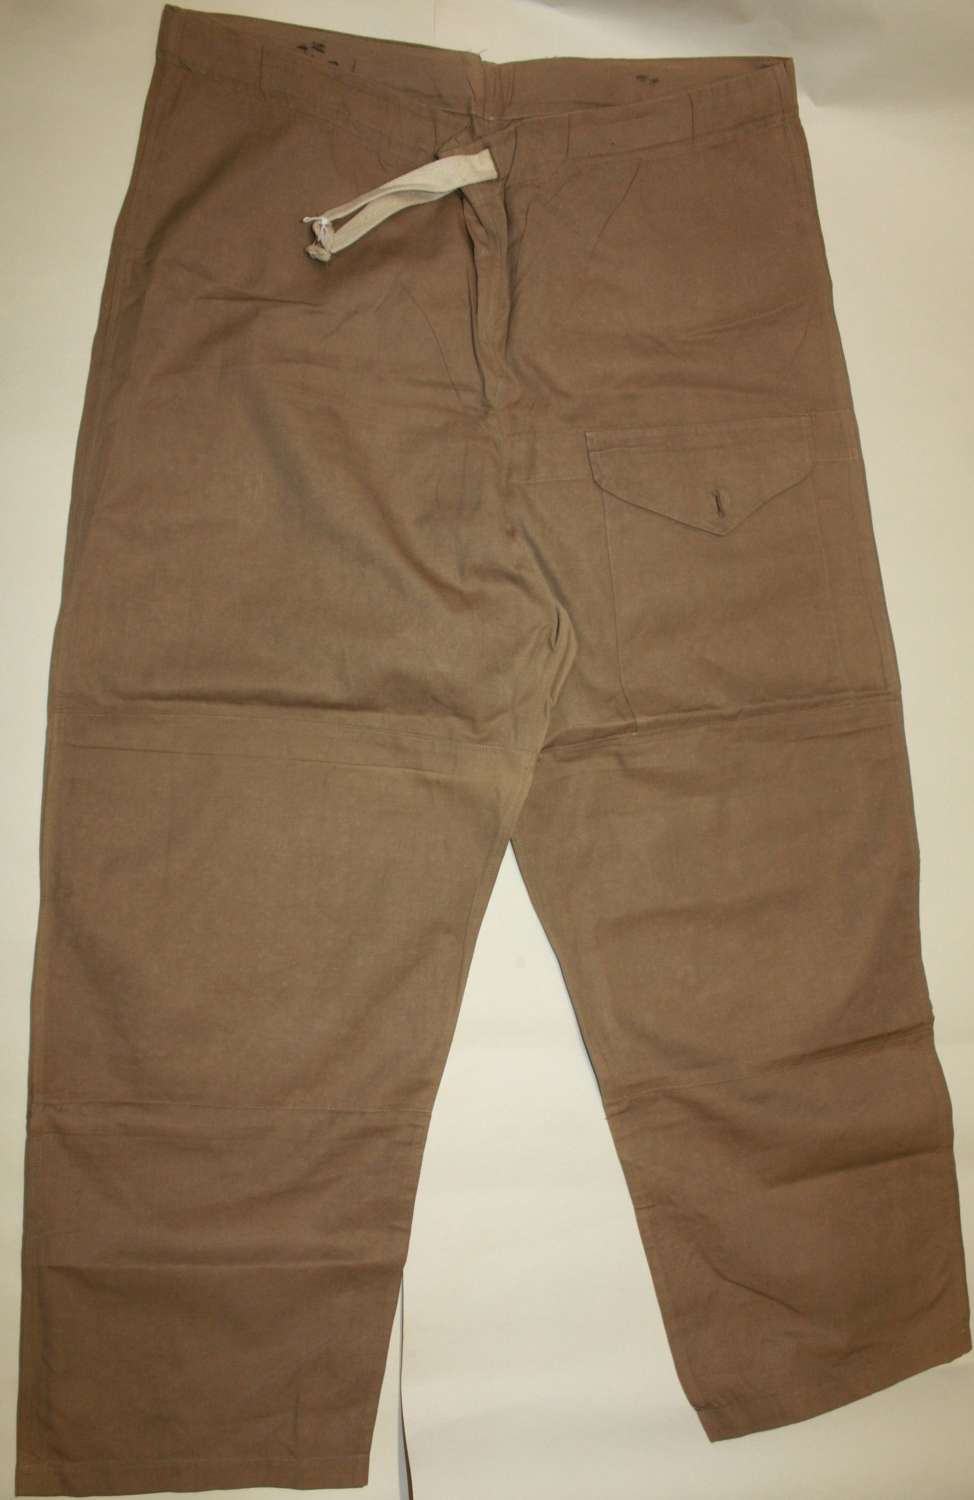 A VERY GOOD MINT PAIR OF THE BRITISH TAN WINDPROOF TROUSERS  SIZE 2